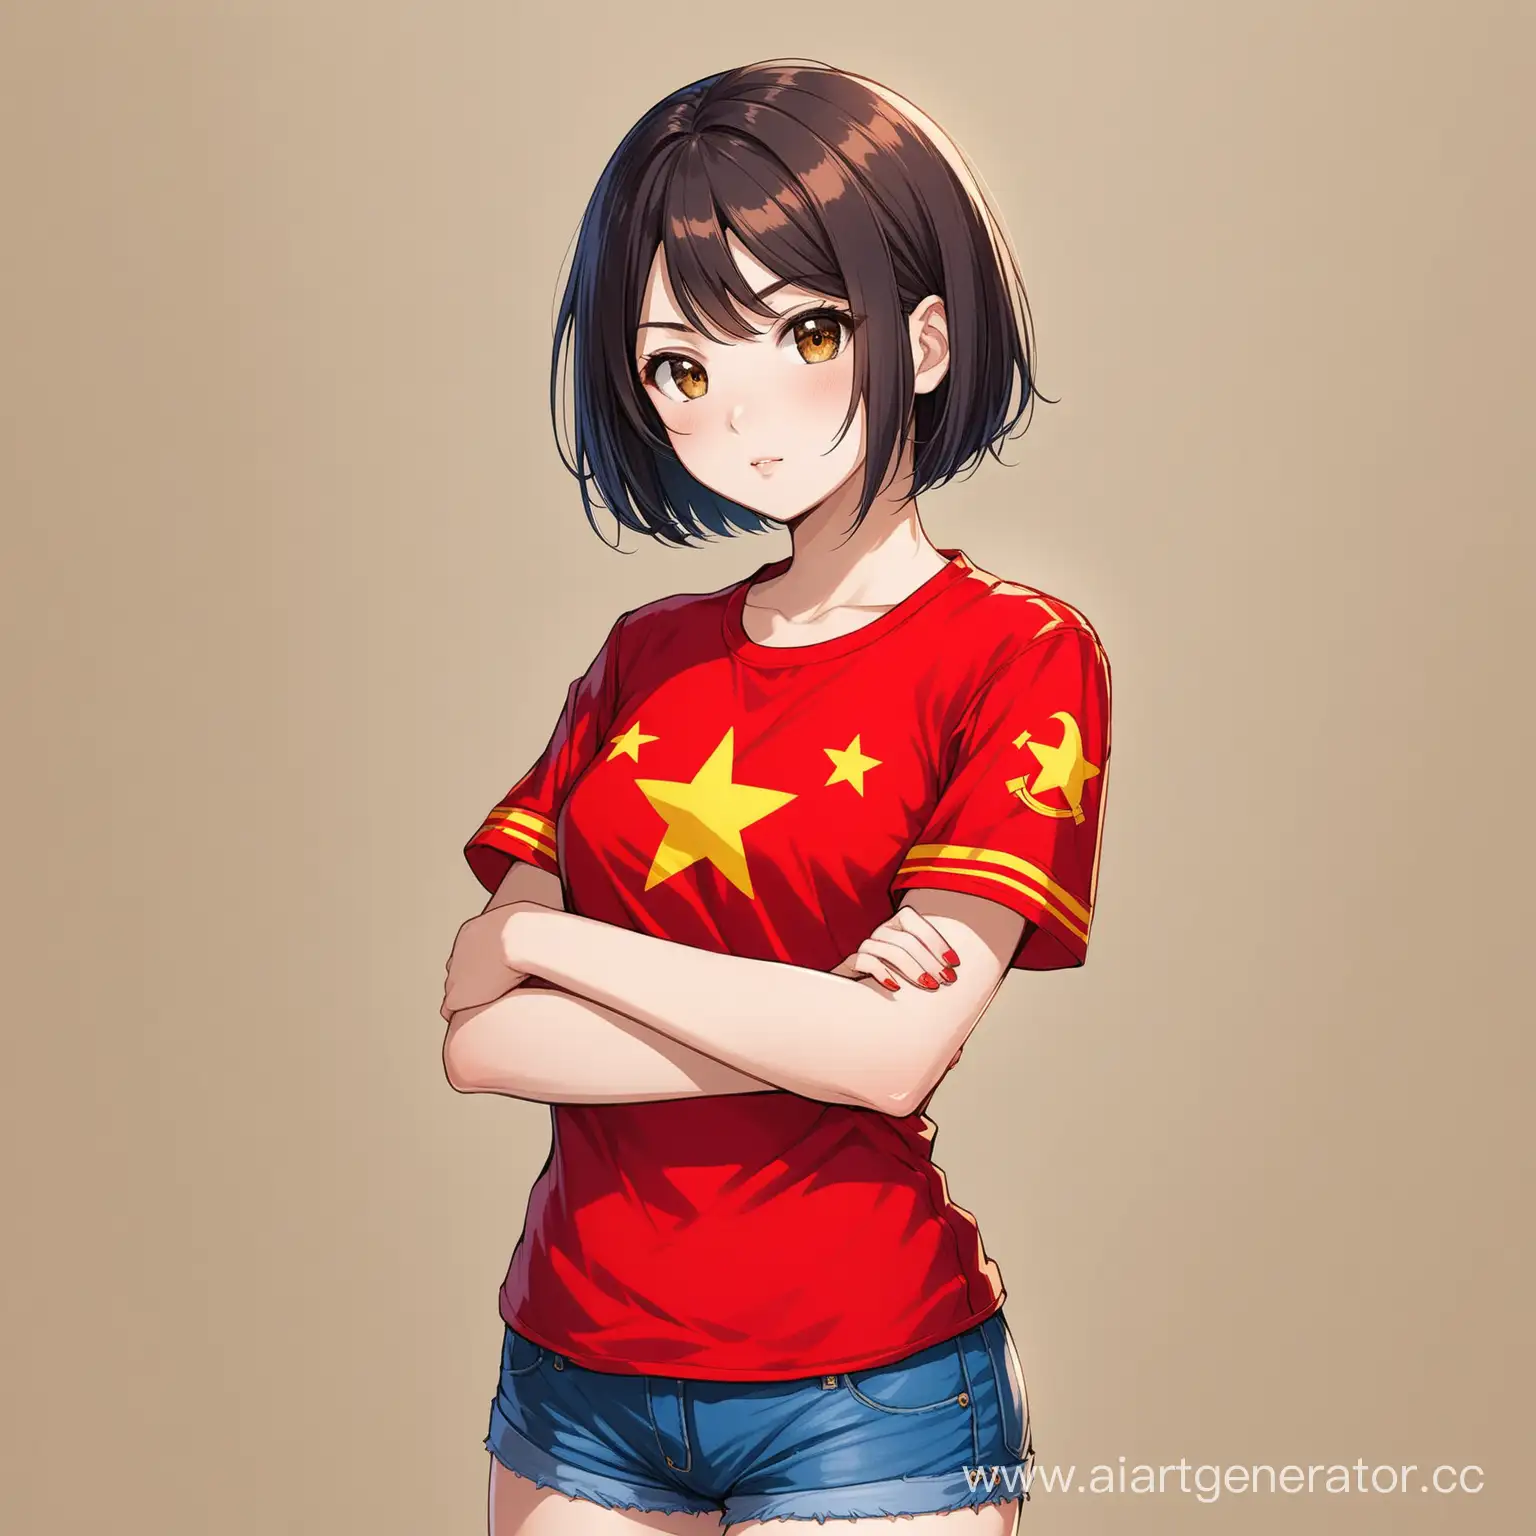 Young-Woman-in-Communist-Party-Attire-with-Red-Armband